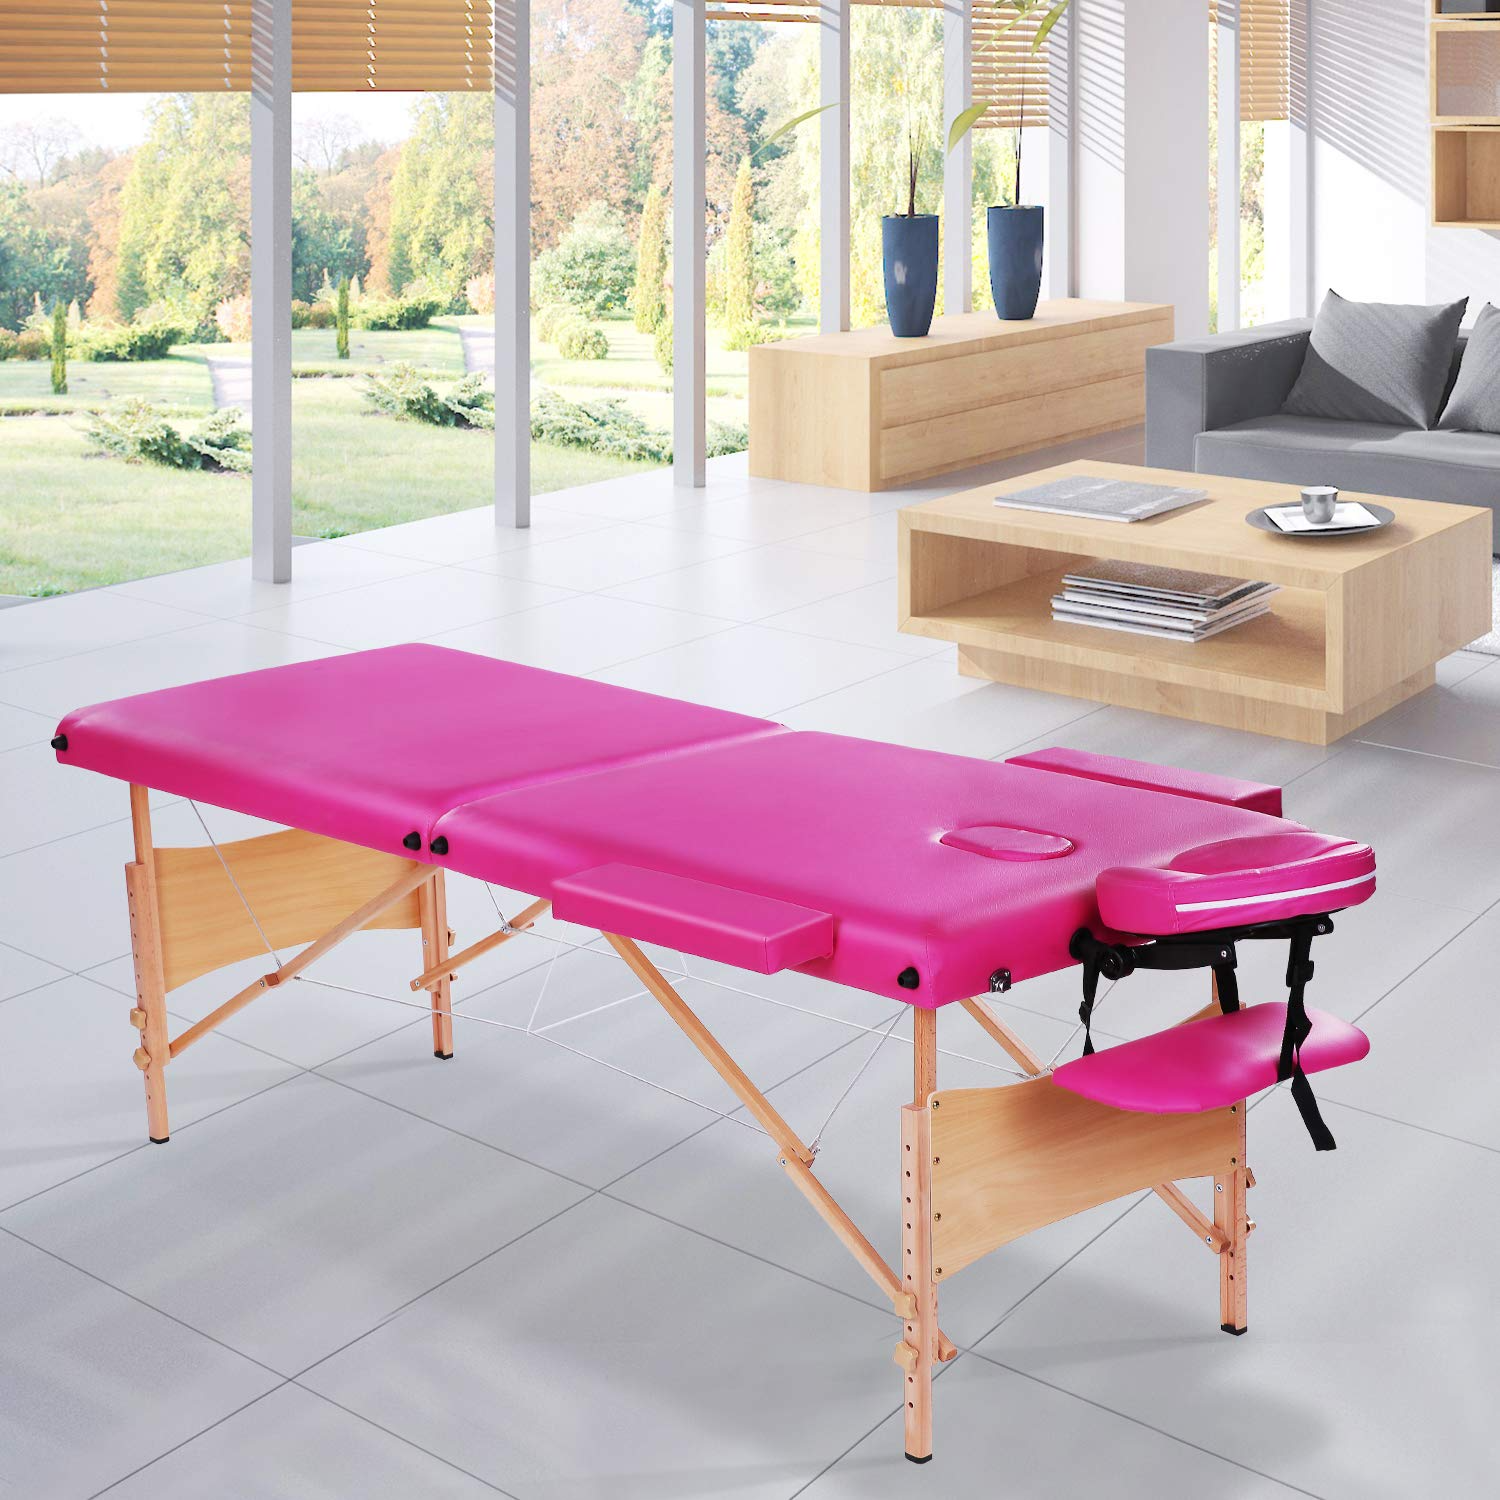 Load image into Gallery viewer, Maxkare Portable Folding Massage Table 2 Section with Headrest, Armrest, and Hand Pallet, 496lbs Capacity, Pink
